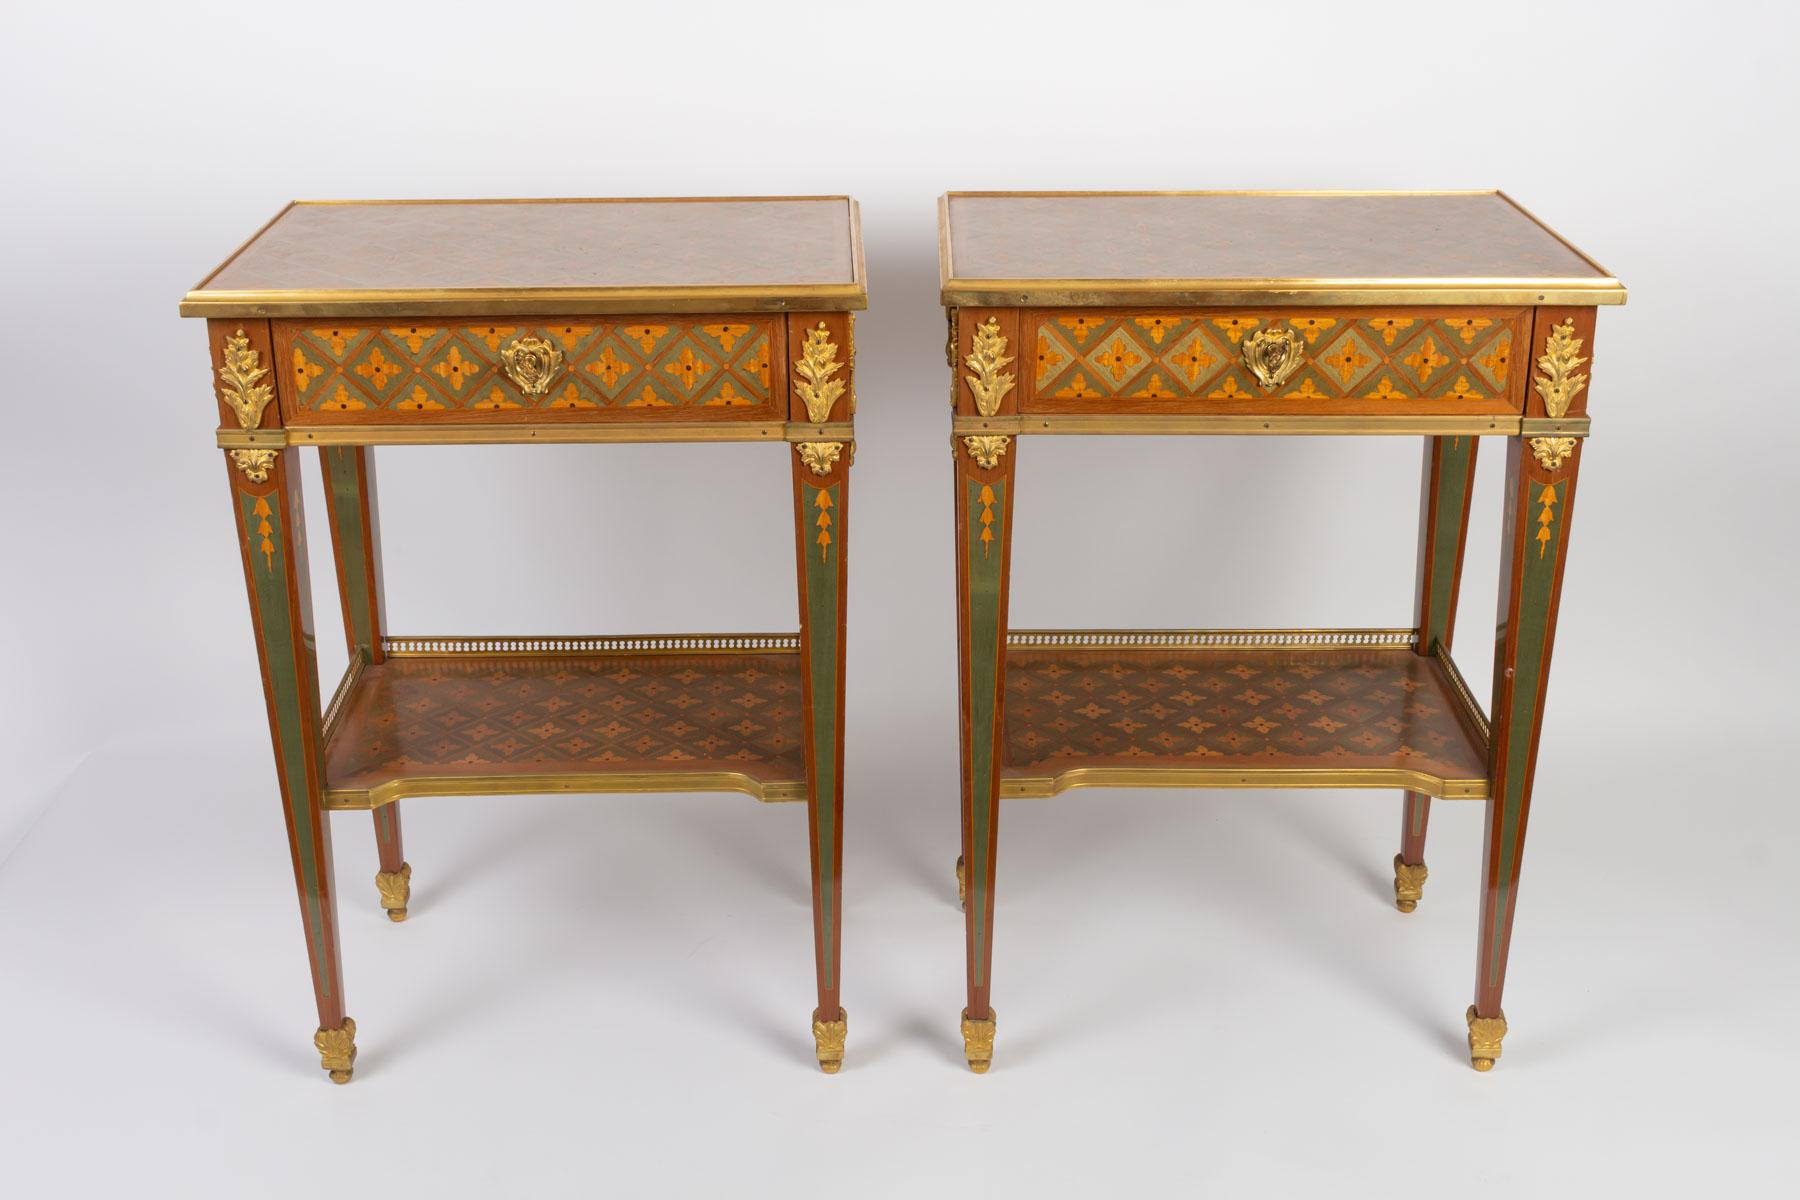 Bronze Pair of Consoles in Precious Wood Marquetry